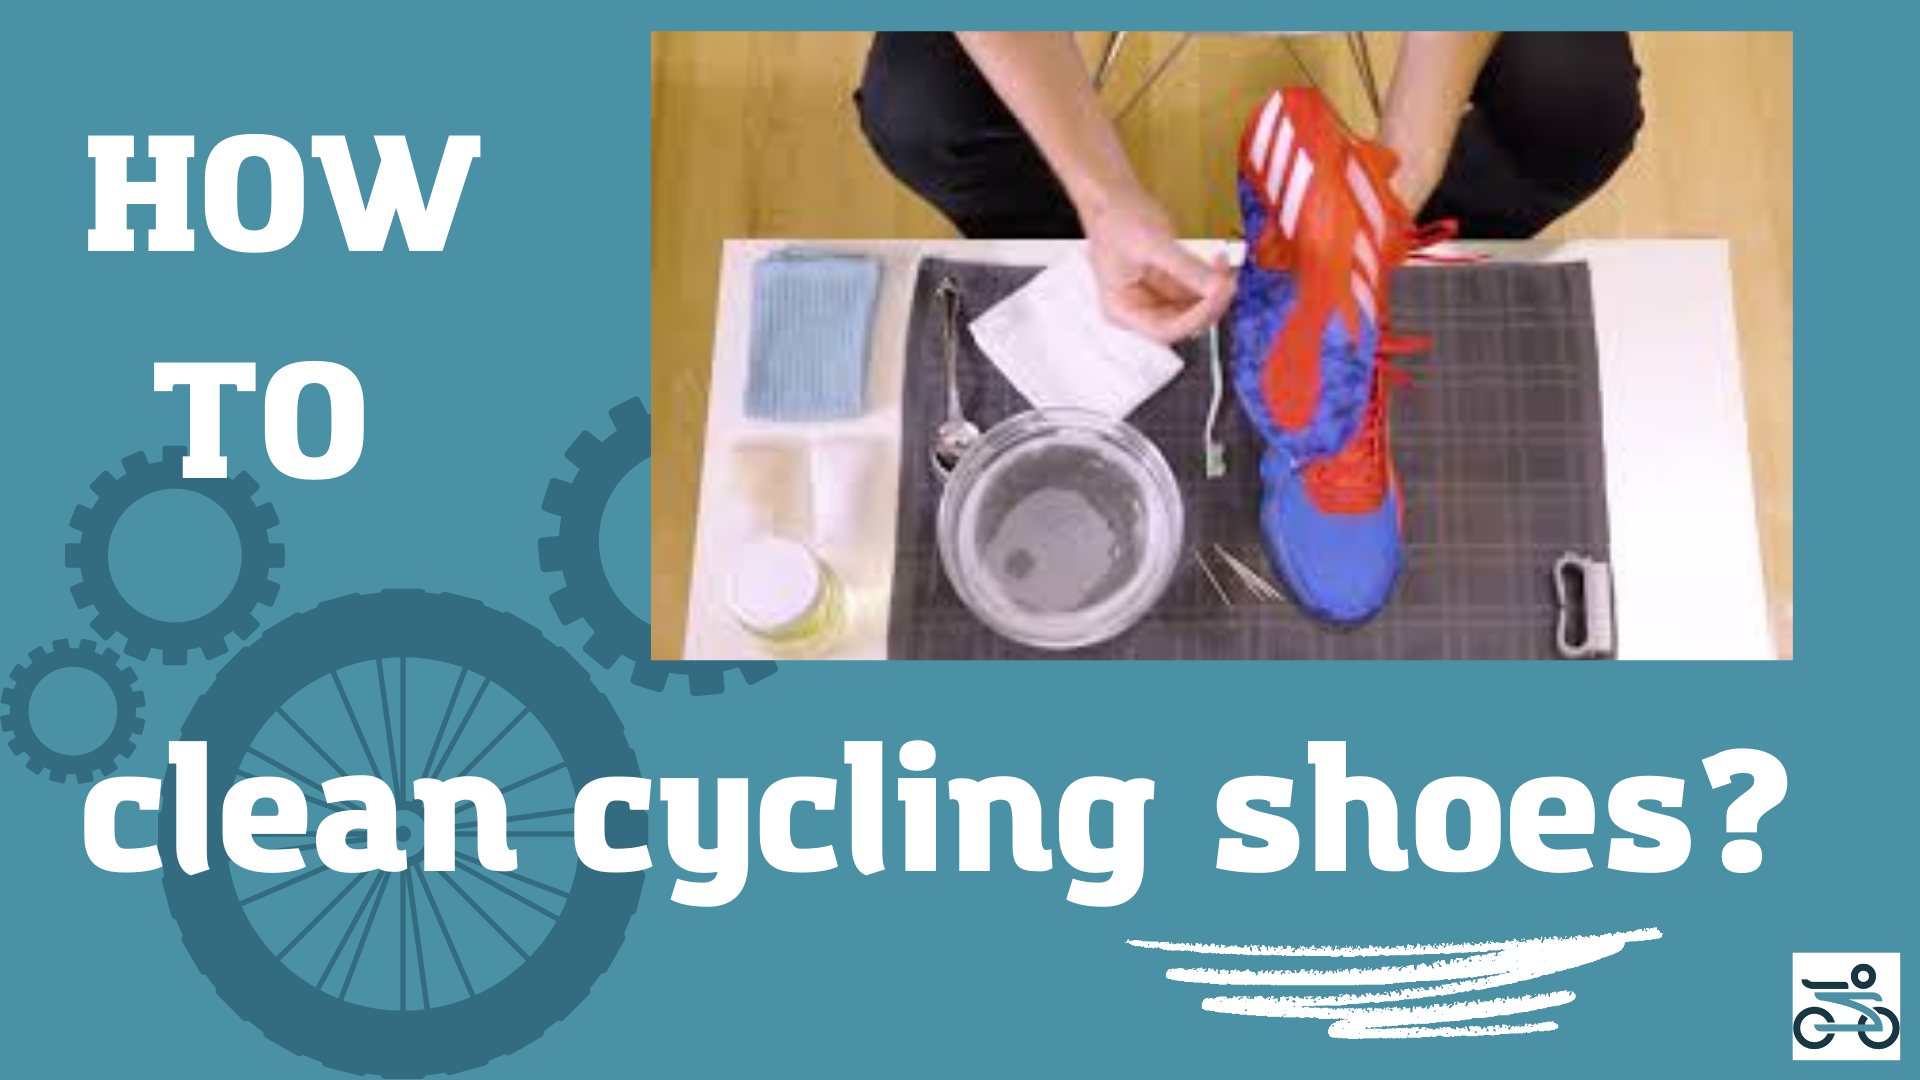 How To Clean Cycling Shoes? - Professional recommendation